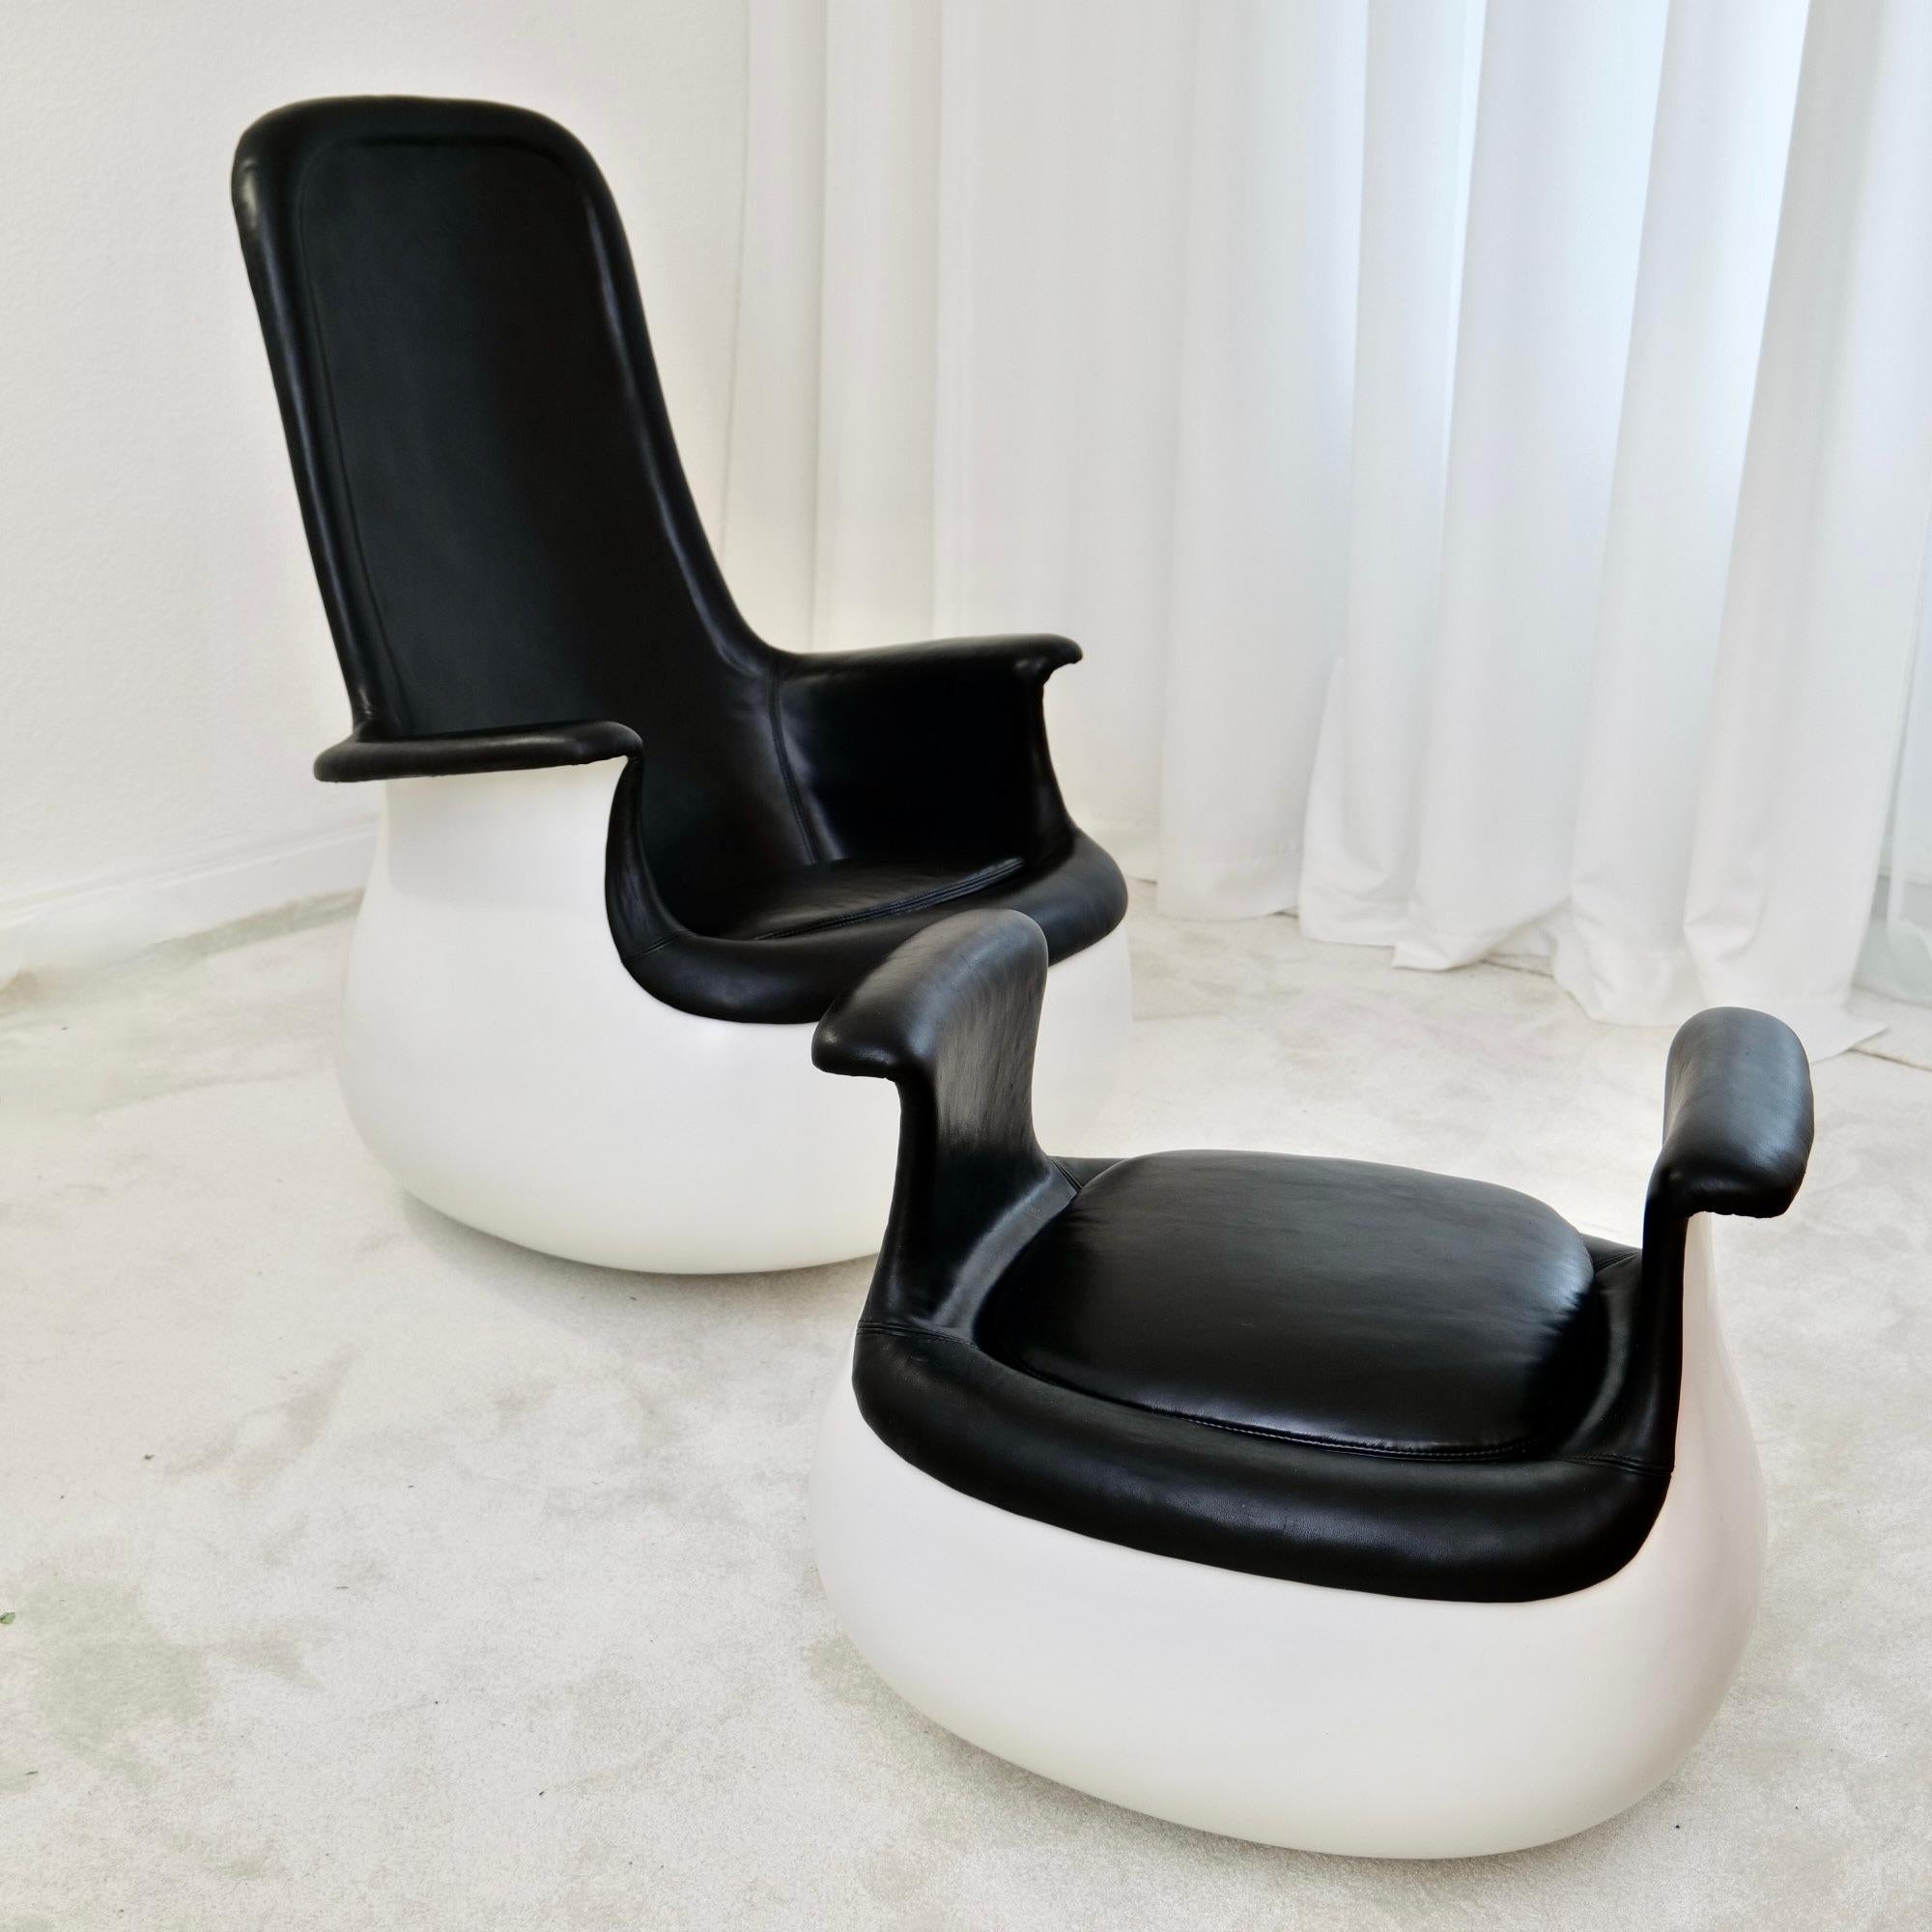 - armchair + ottomane 
- Marc Held for Knoll International (1967 - 1972)
- full restored
- high quality black aniline leather


materials:
fiberglass, leather

